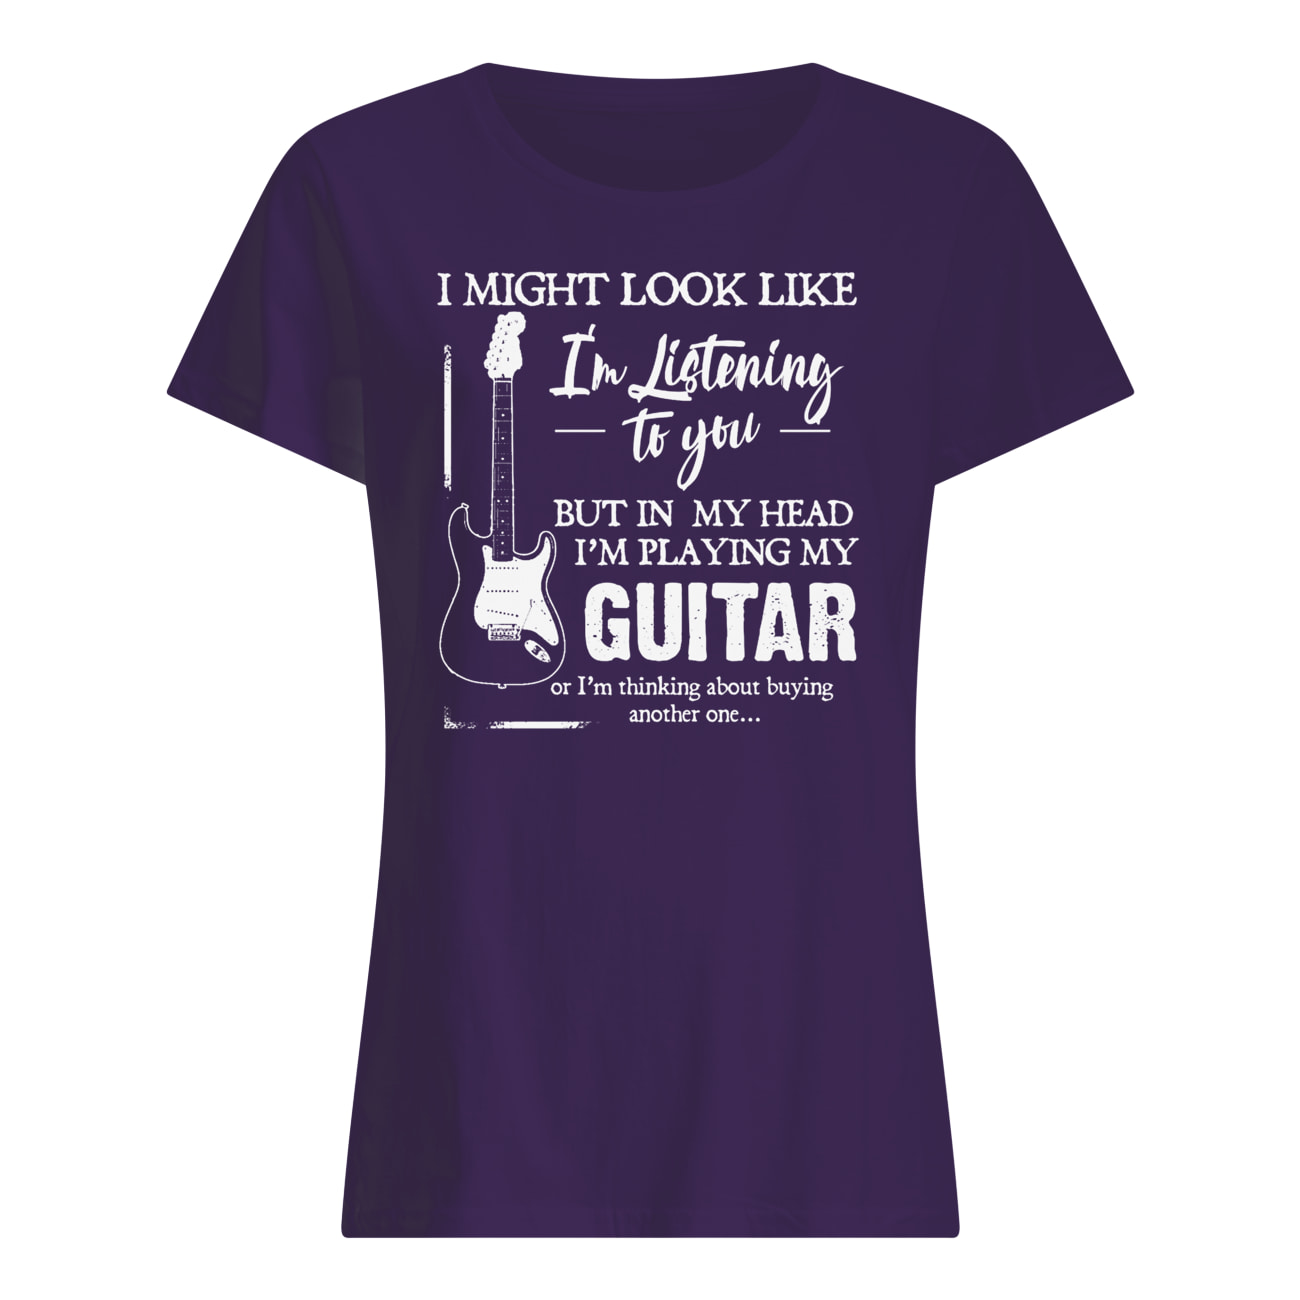 I might look like i'm listening to you but in my head i'm playing my guitar womens shirt